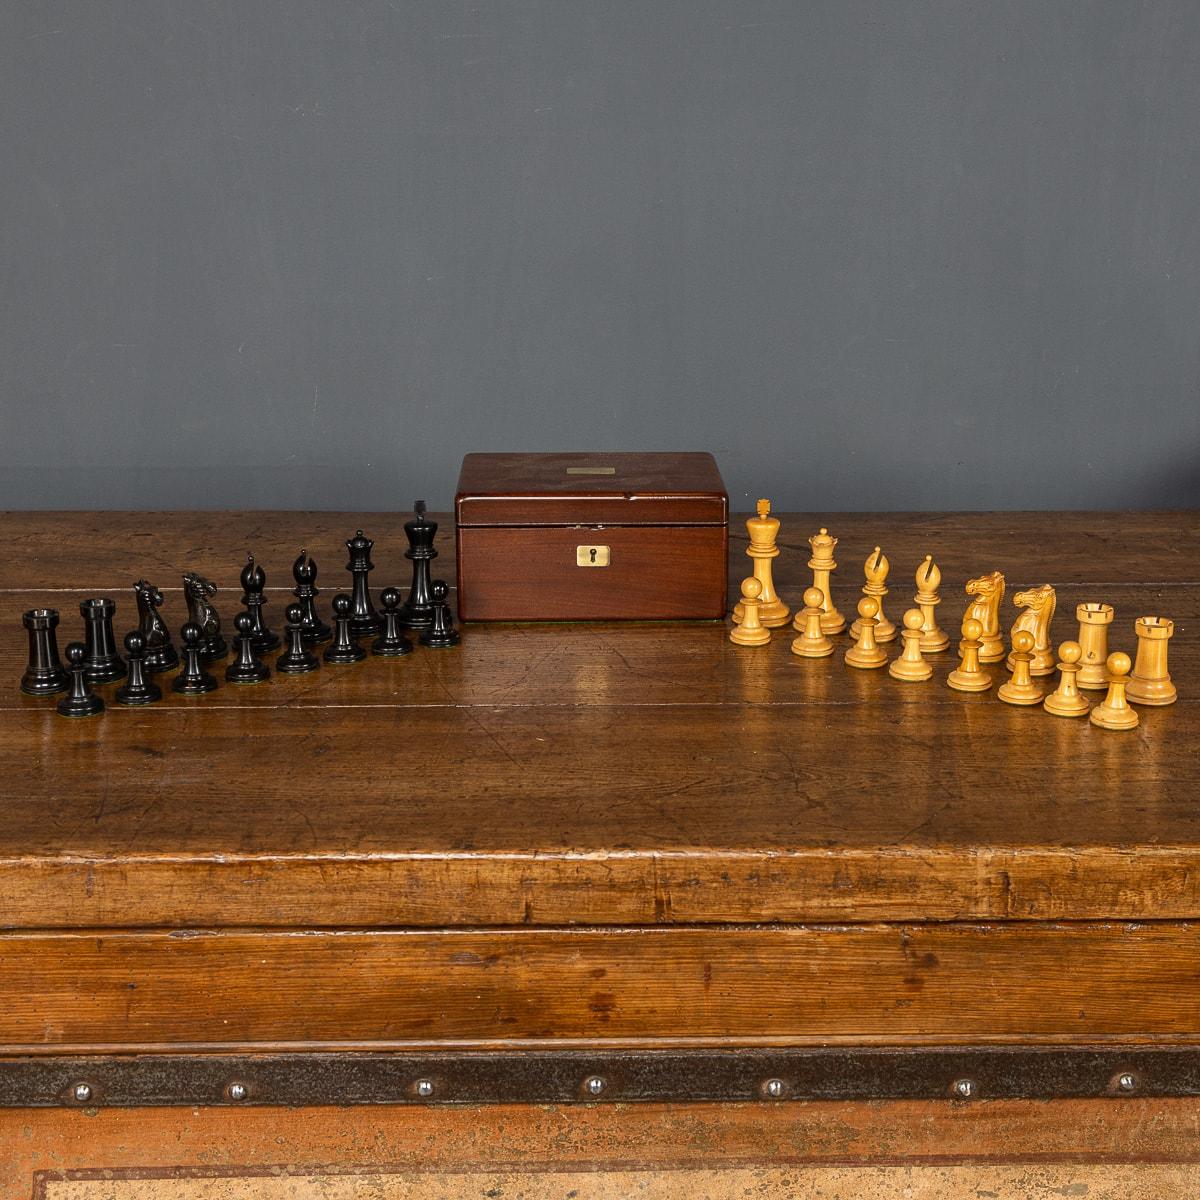 Antique early-20th century Edwardian mahogany chess set, contains club sized chess set by Staunton. The pieces are weighted and carved from Boxwood and ebony.

CONDITION
In Great Condition - No Damage.

Size
Box Size:
Height: 11cm
Width: